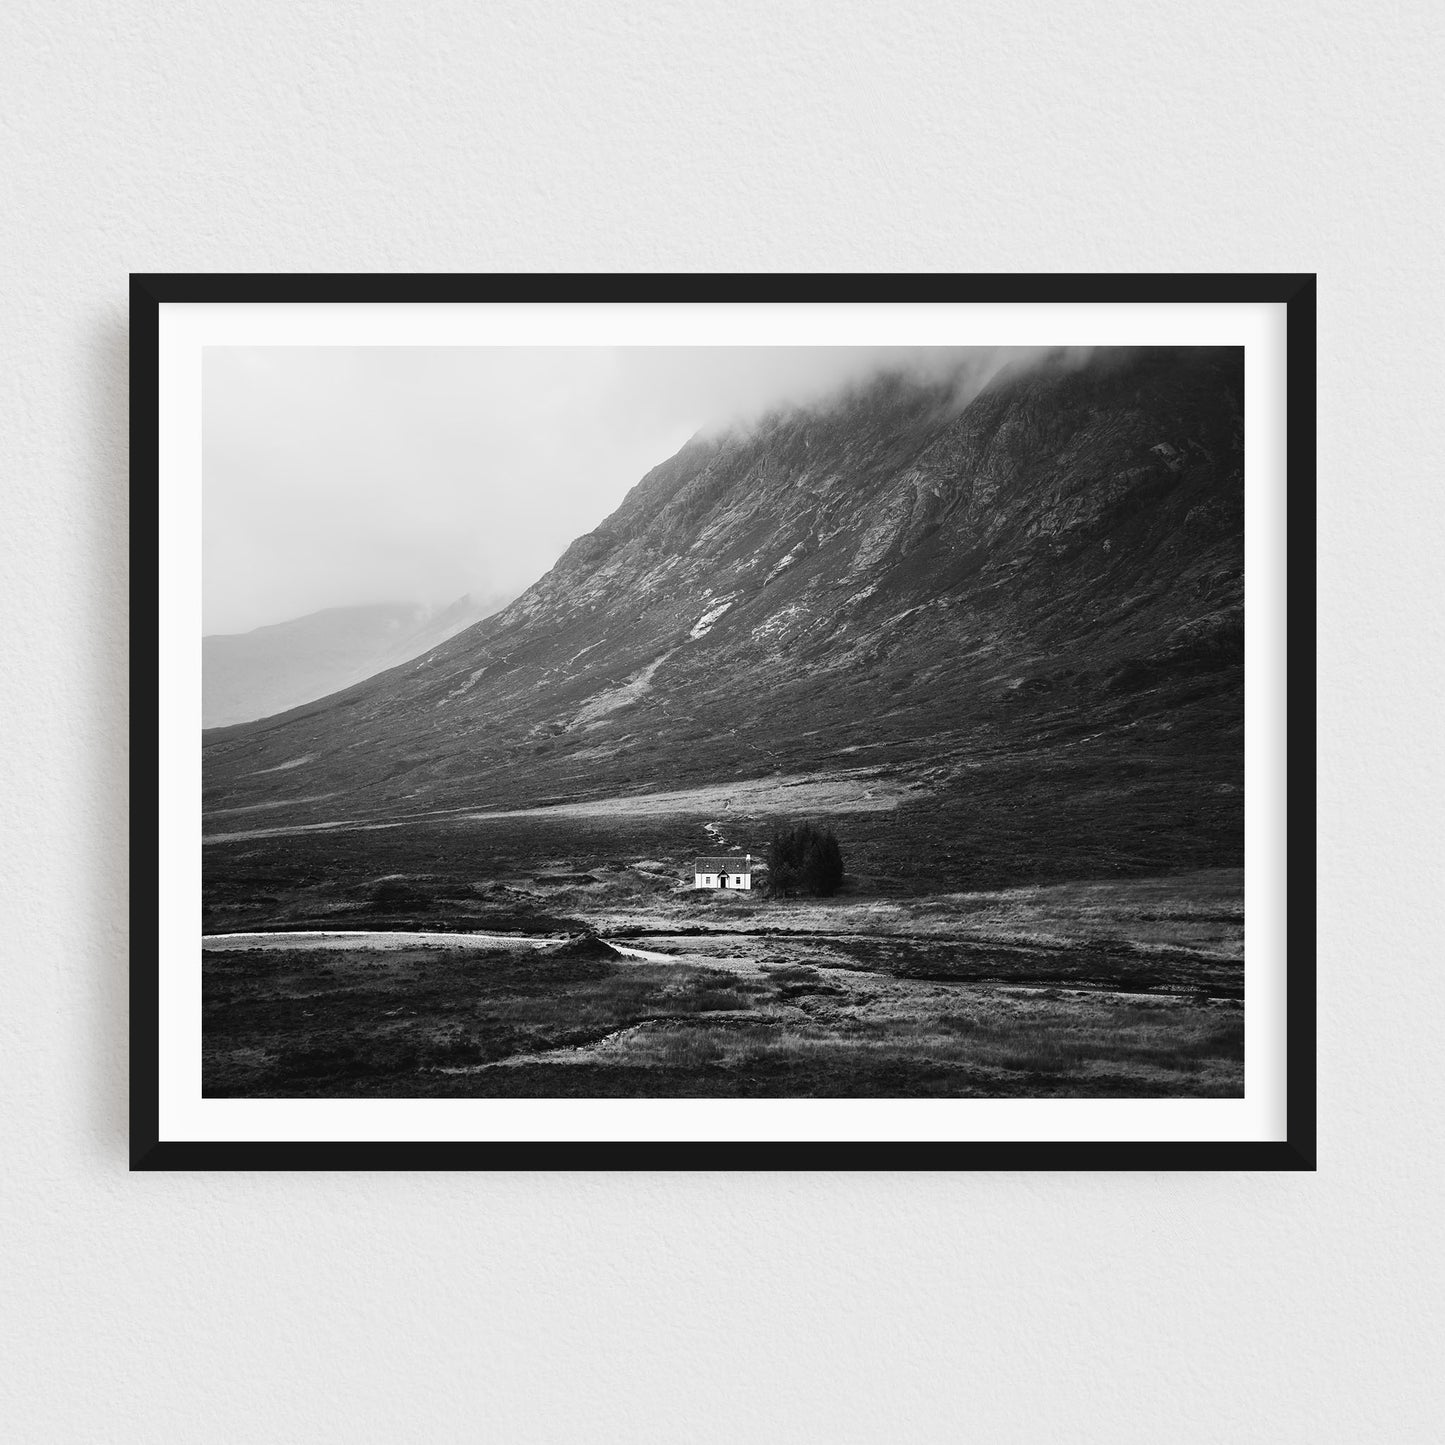 The Lonely White Cottage of Glencoe (B&W)